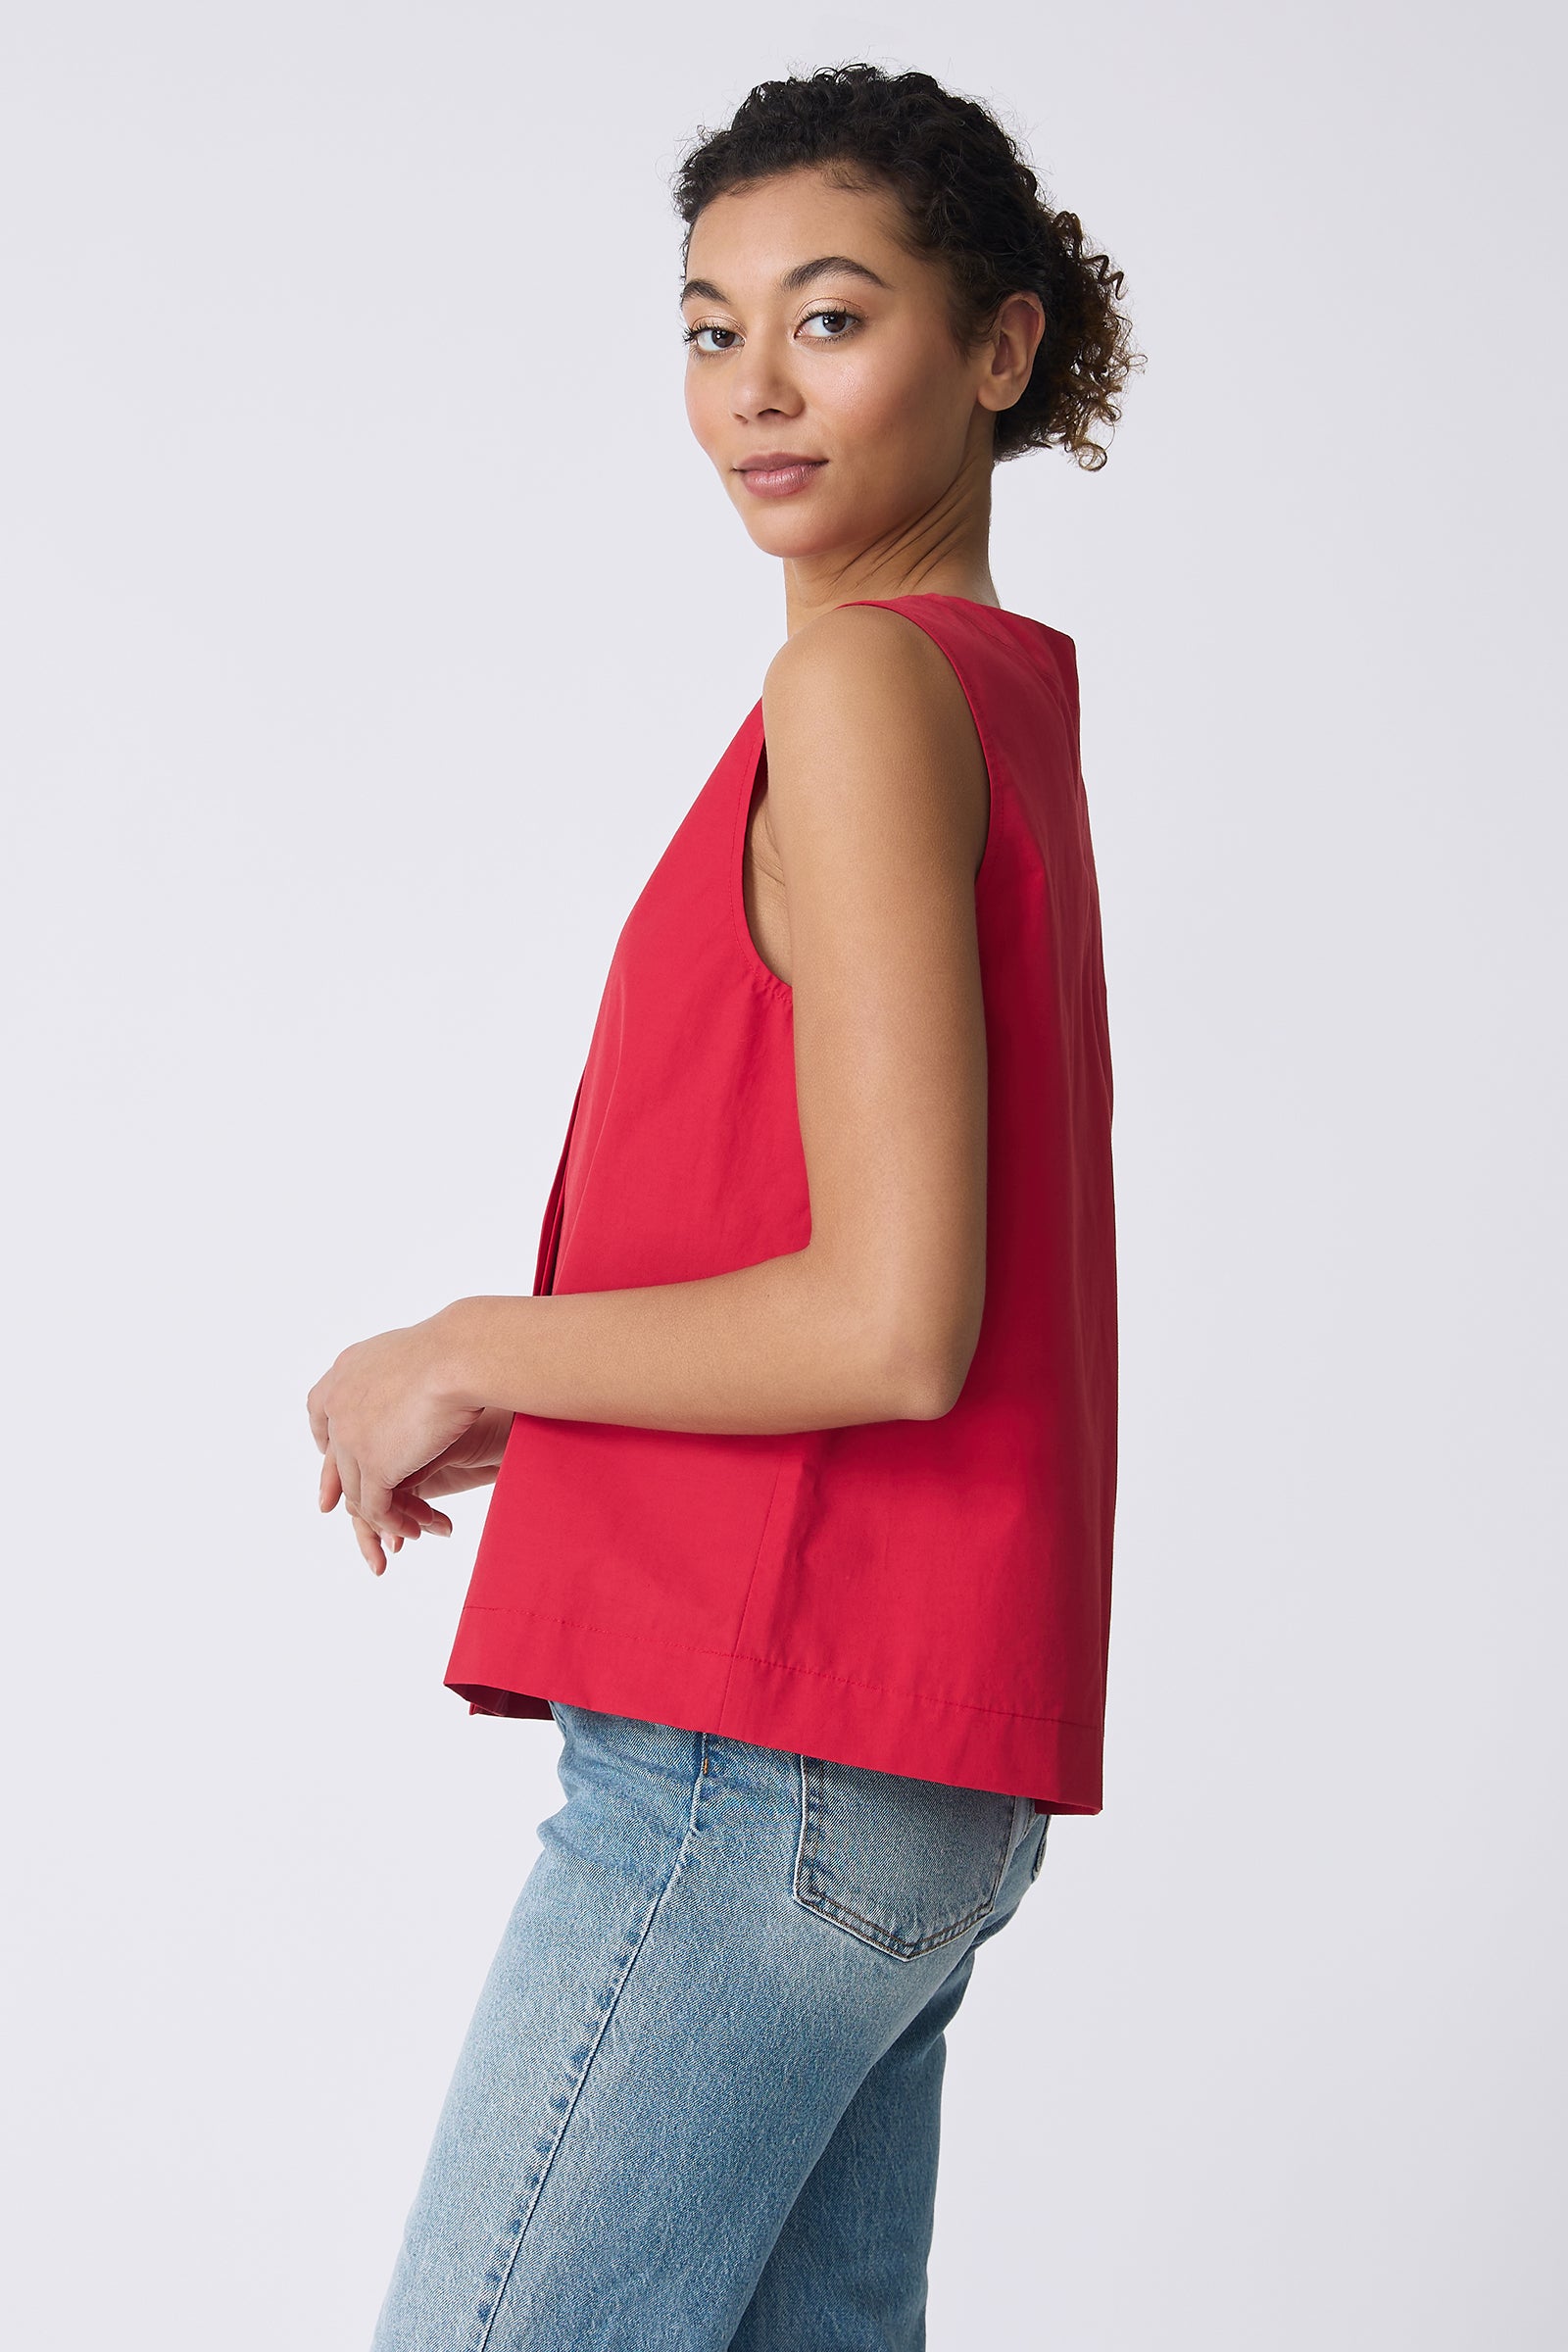 Kal Rieman Colette Shell Top in Red on model side view